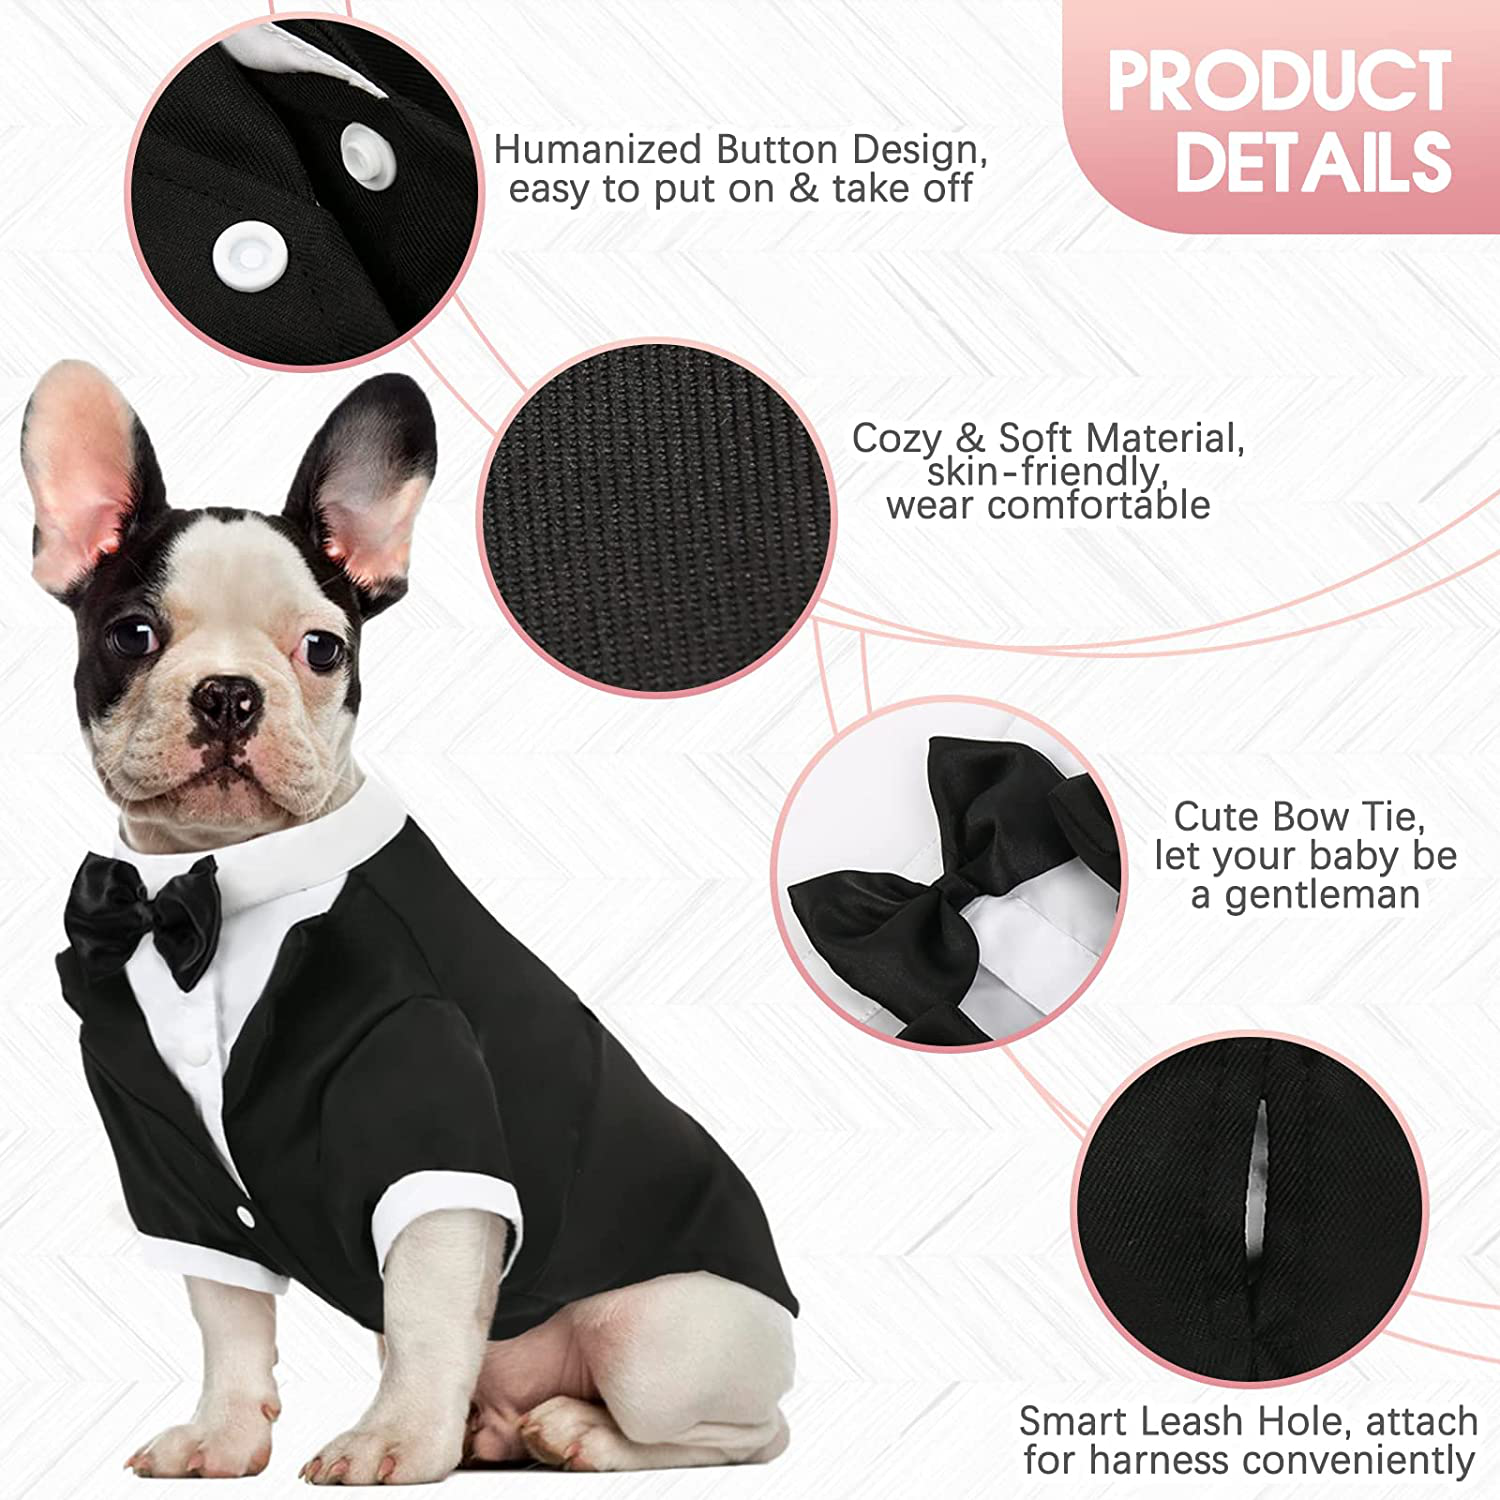 Kuoser Dog Shirt Puppy Pet Small Dog Clothes, Stylish Suit Bow Tie Costume, Wedding Shirt Formal Tuxedo with Black Tie, Dog Prince Wedding Bow Tie Suit